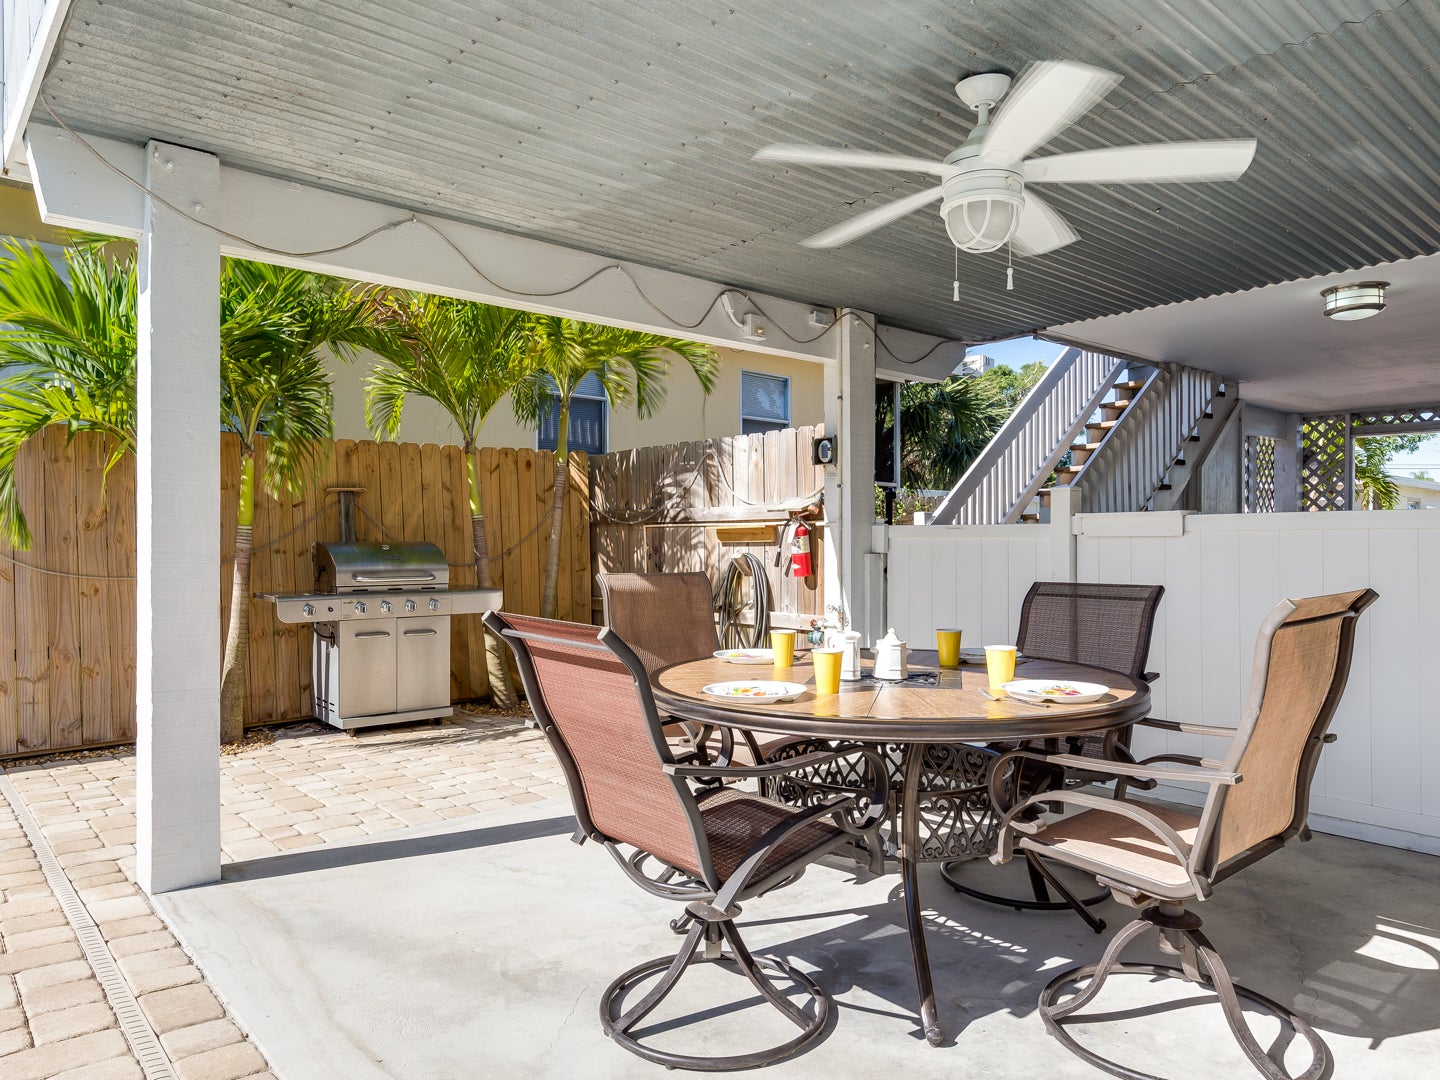 Outdoor patio with bbq grill